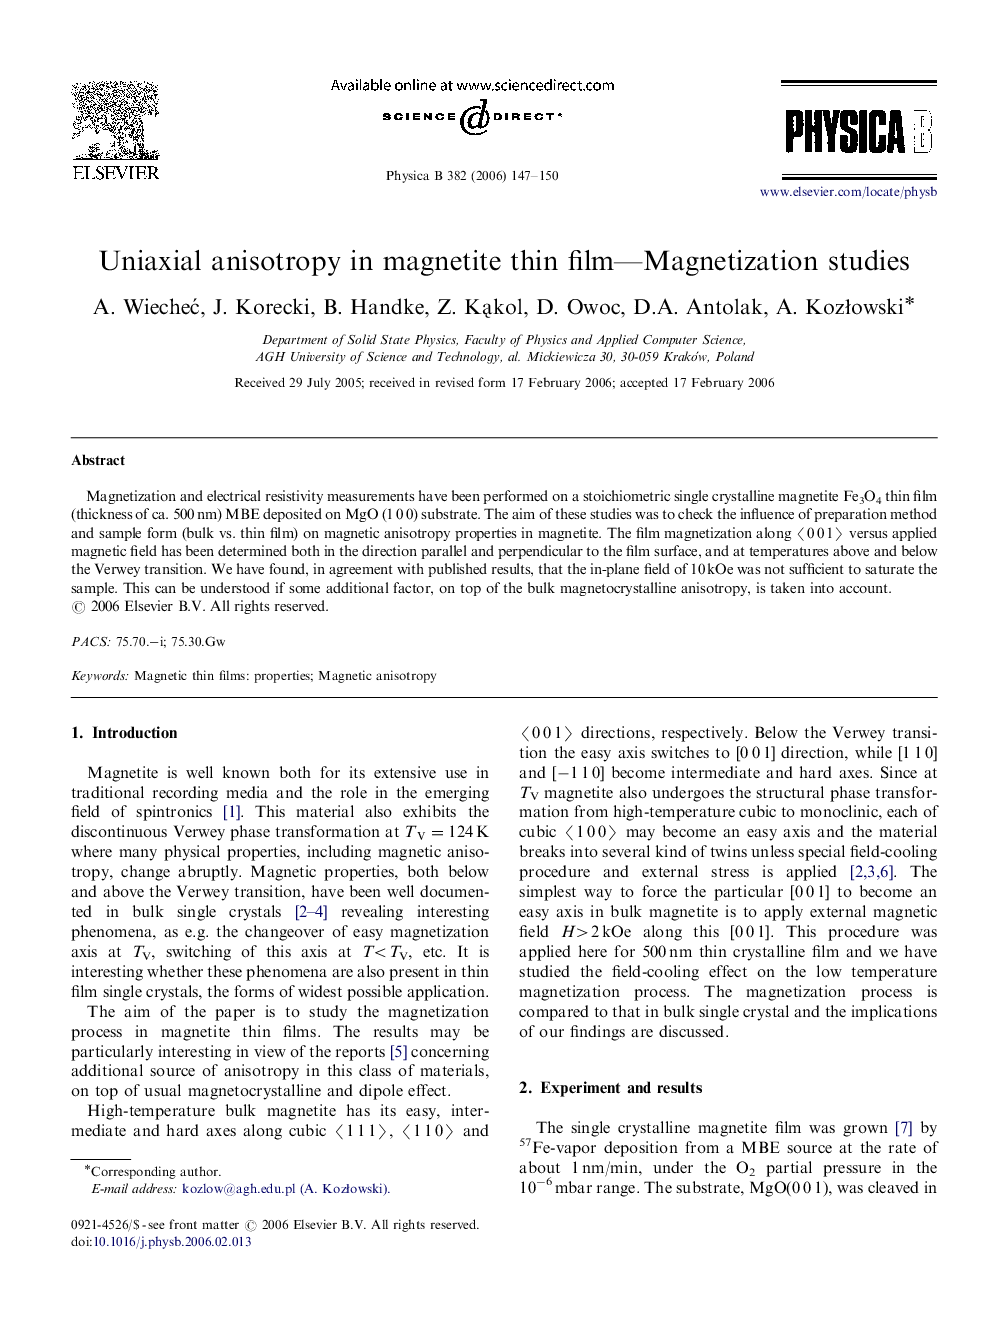 Uniaxial anisotropy in magnetite thin film-Magnetization studies